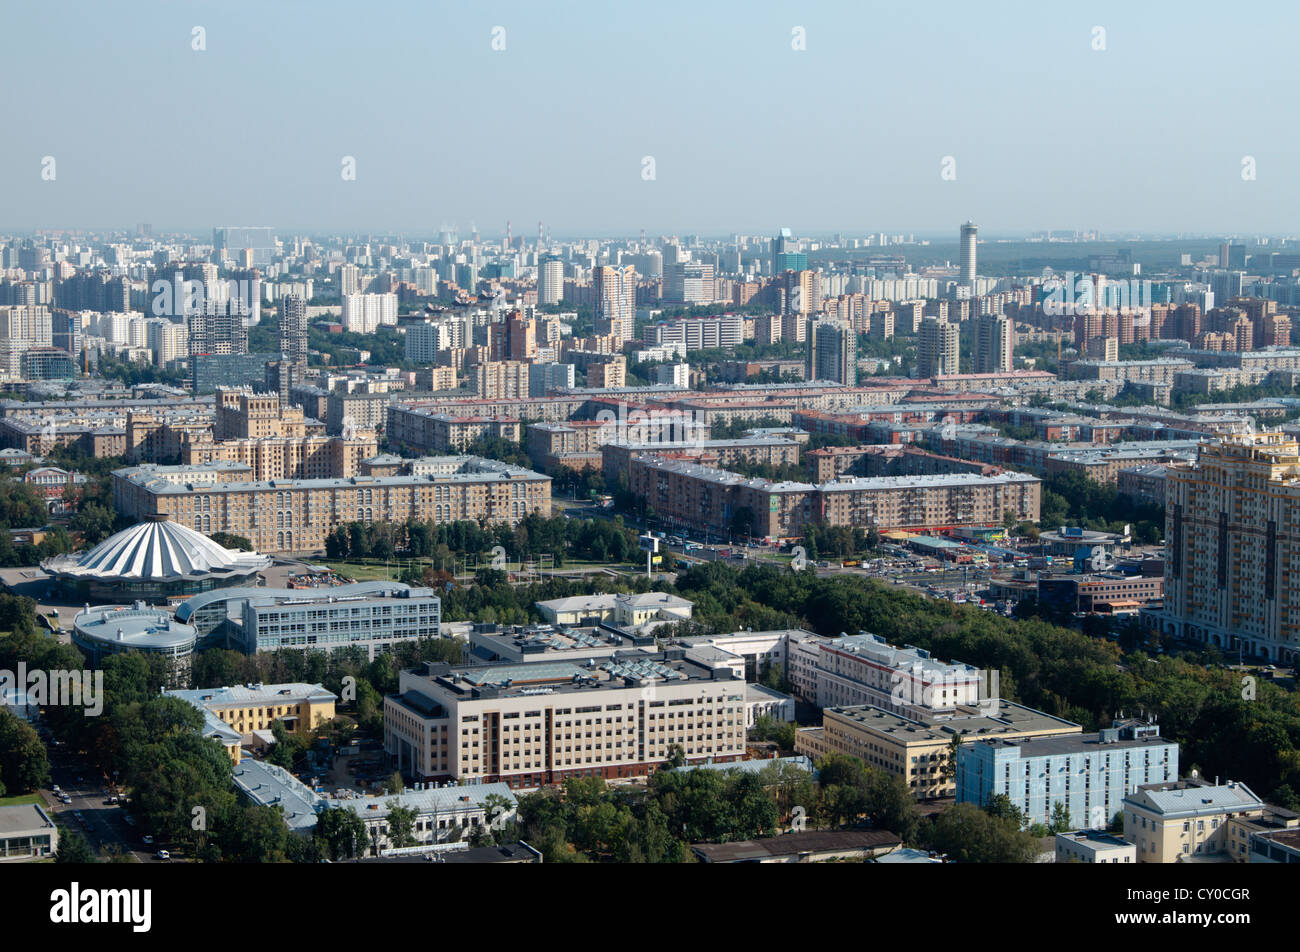 Moscow, Russia Skyline of modern Moscow, Russia. Photo taken from the Main Building of Moscow State University. Photo Aug 2012. Stock Photo